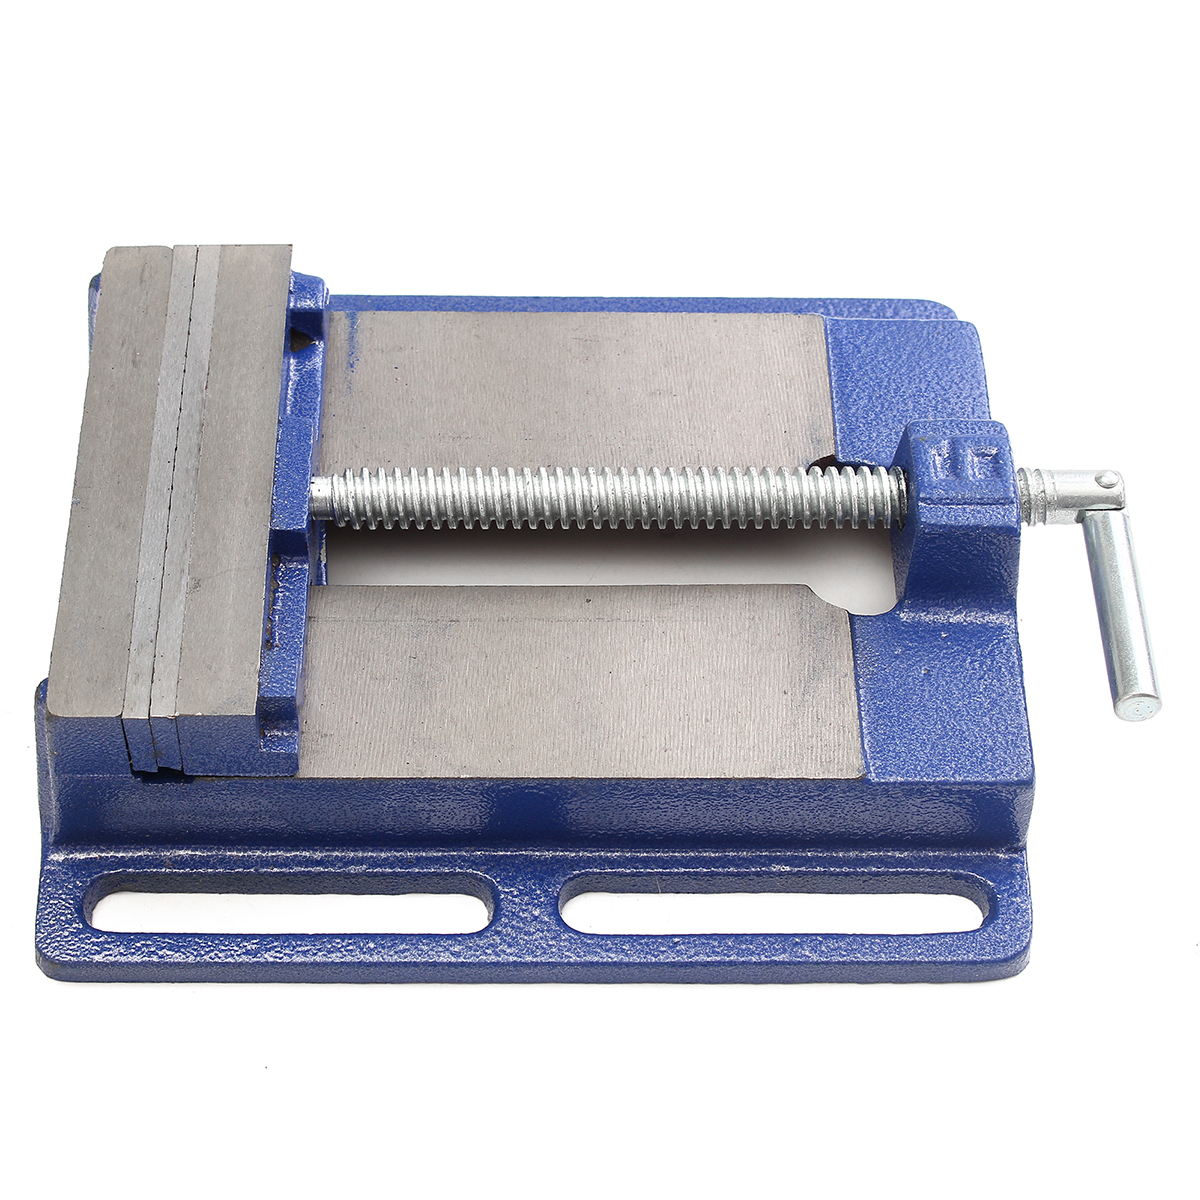 6-Inch-Heavy-Duty-JAW-Drill-Press-Vice-Bench-Clamp-Woodworking-Drilling-1682812-2